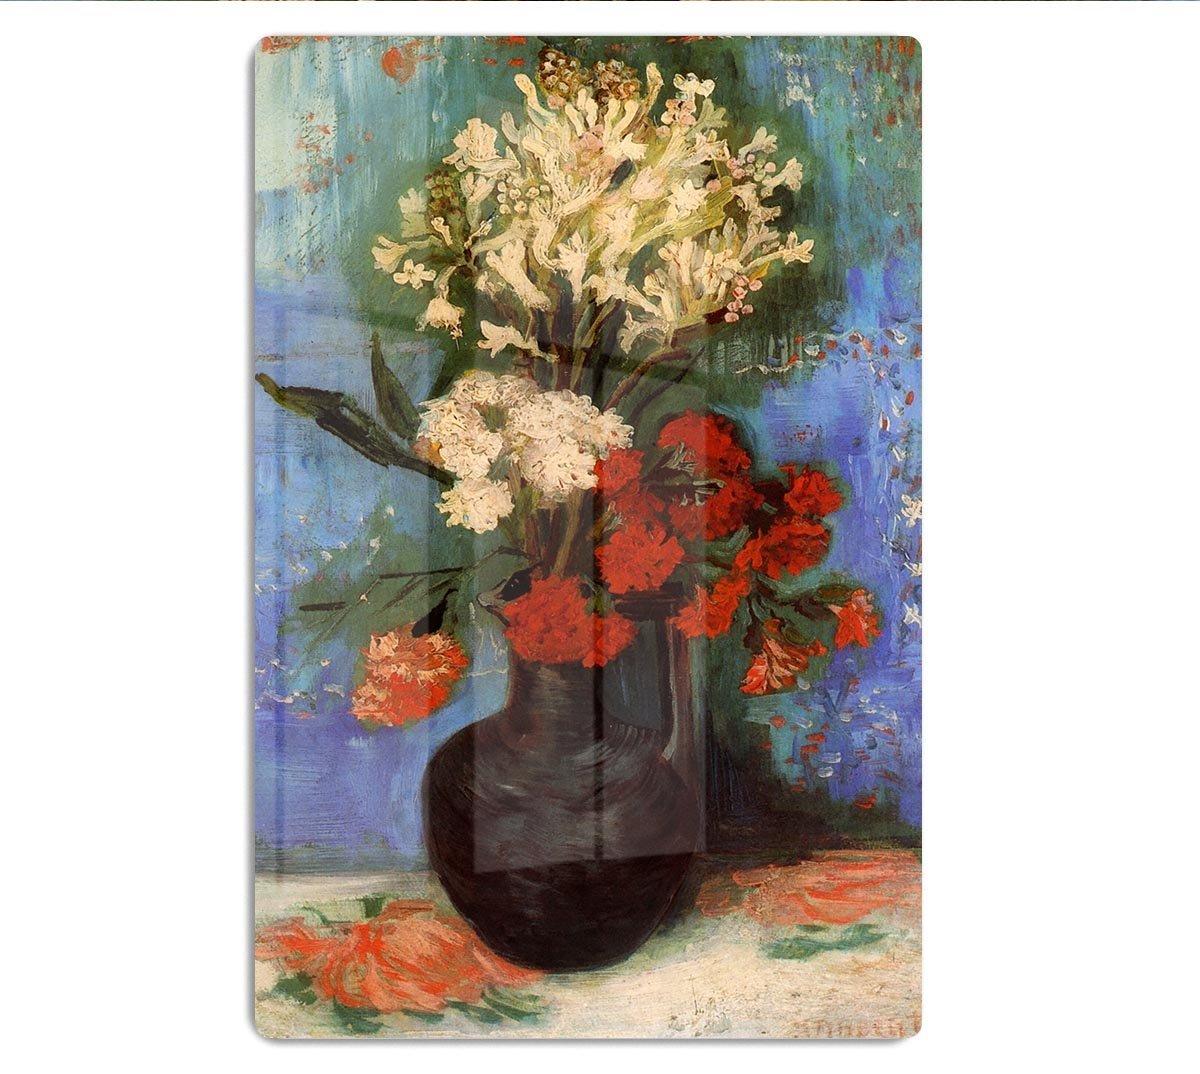 Vase with Carnations and Other Flowers by Van Gogh HD Metal Print